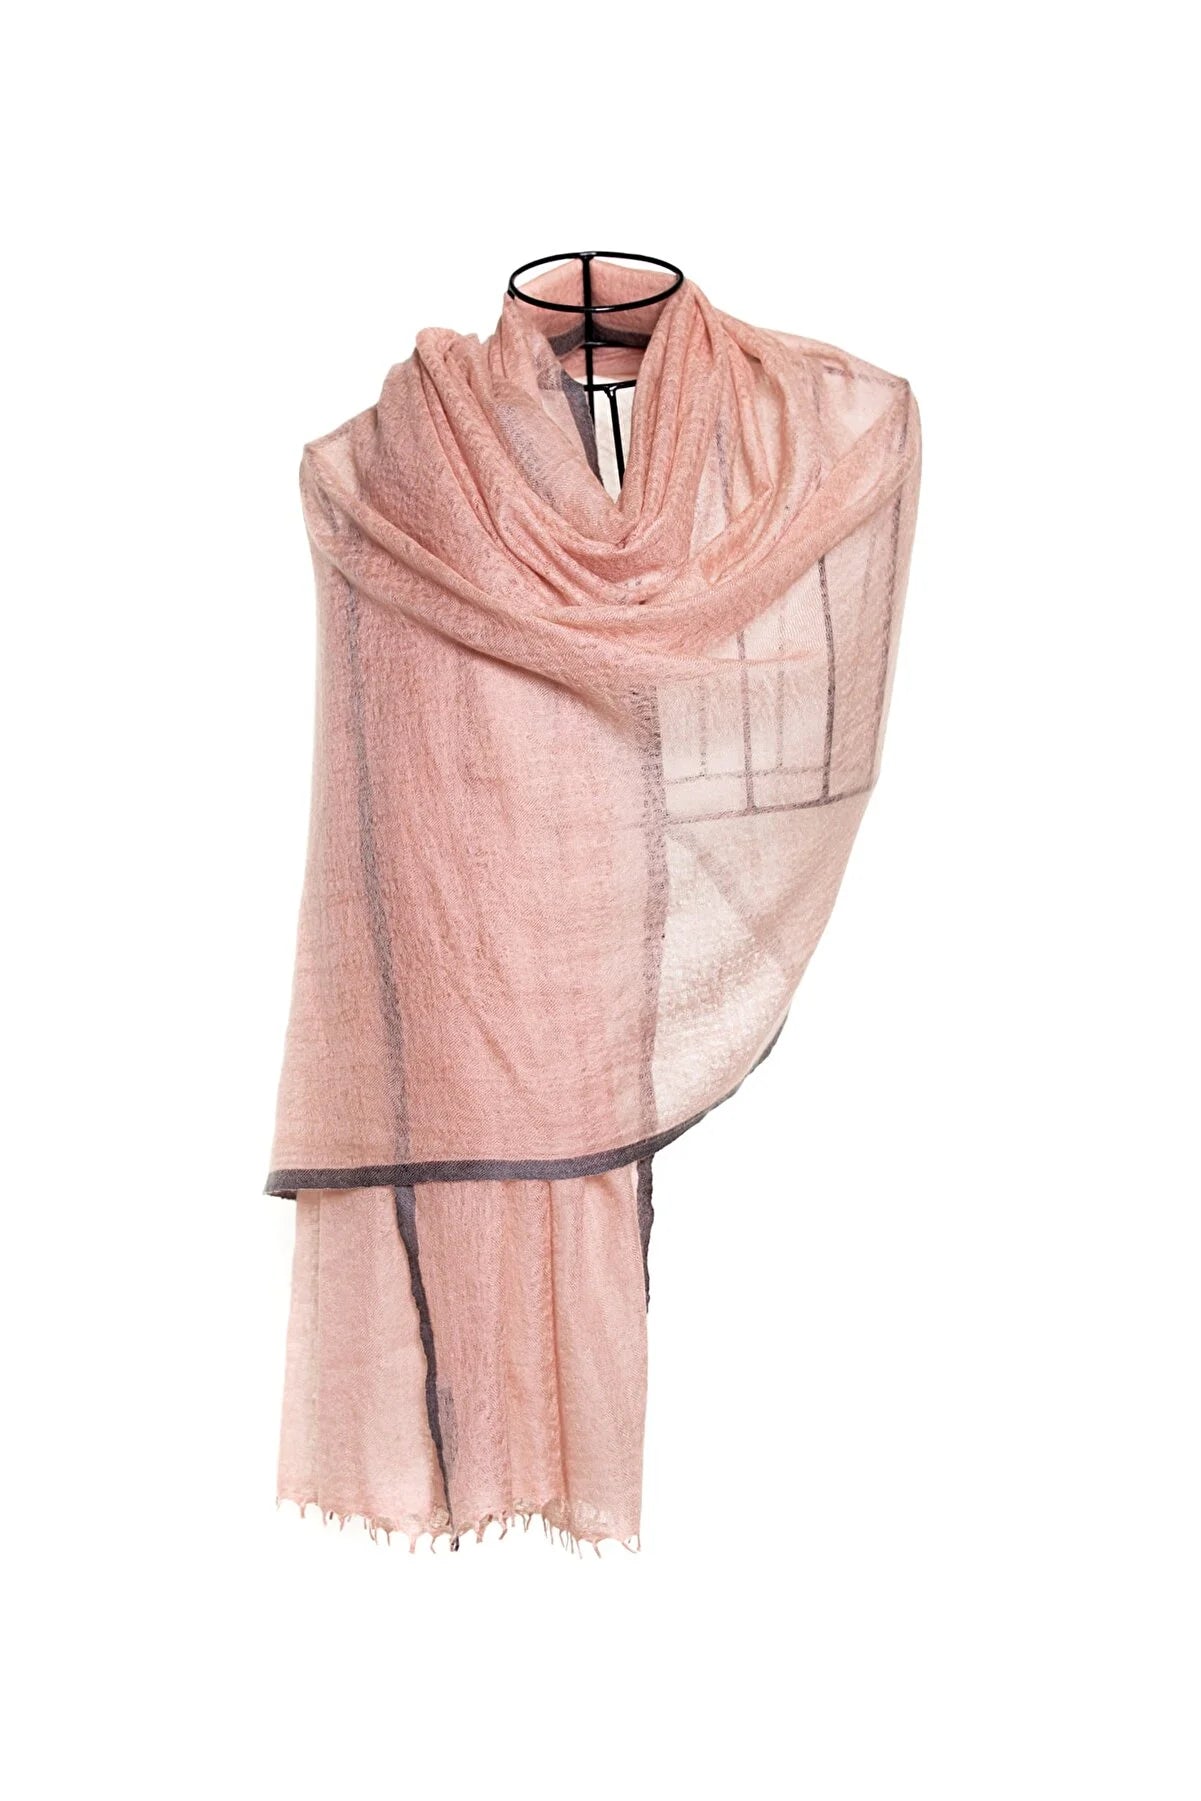 Bordered Sparge Baby Cashmere Shawl - Pink Charcoal